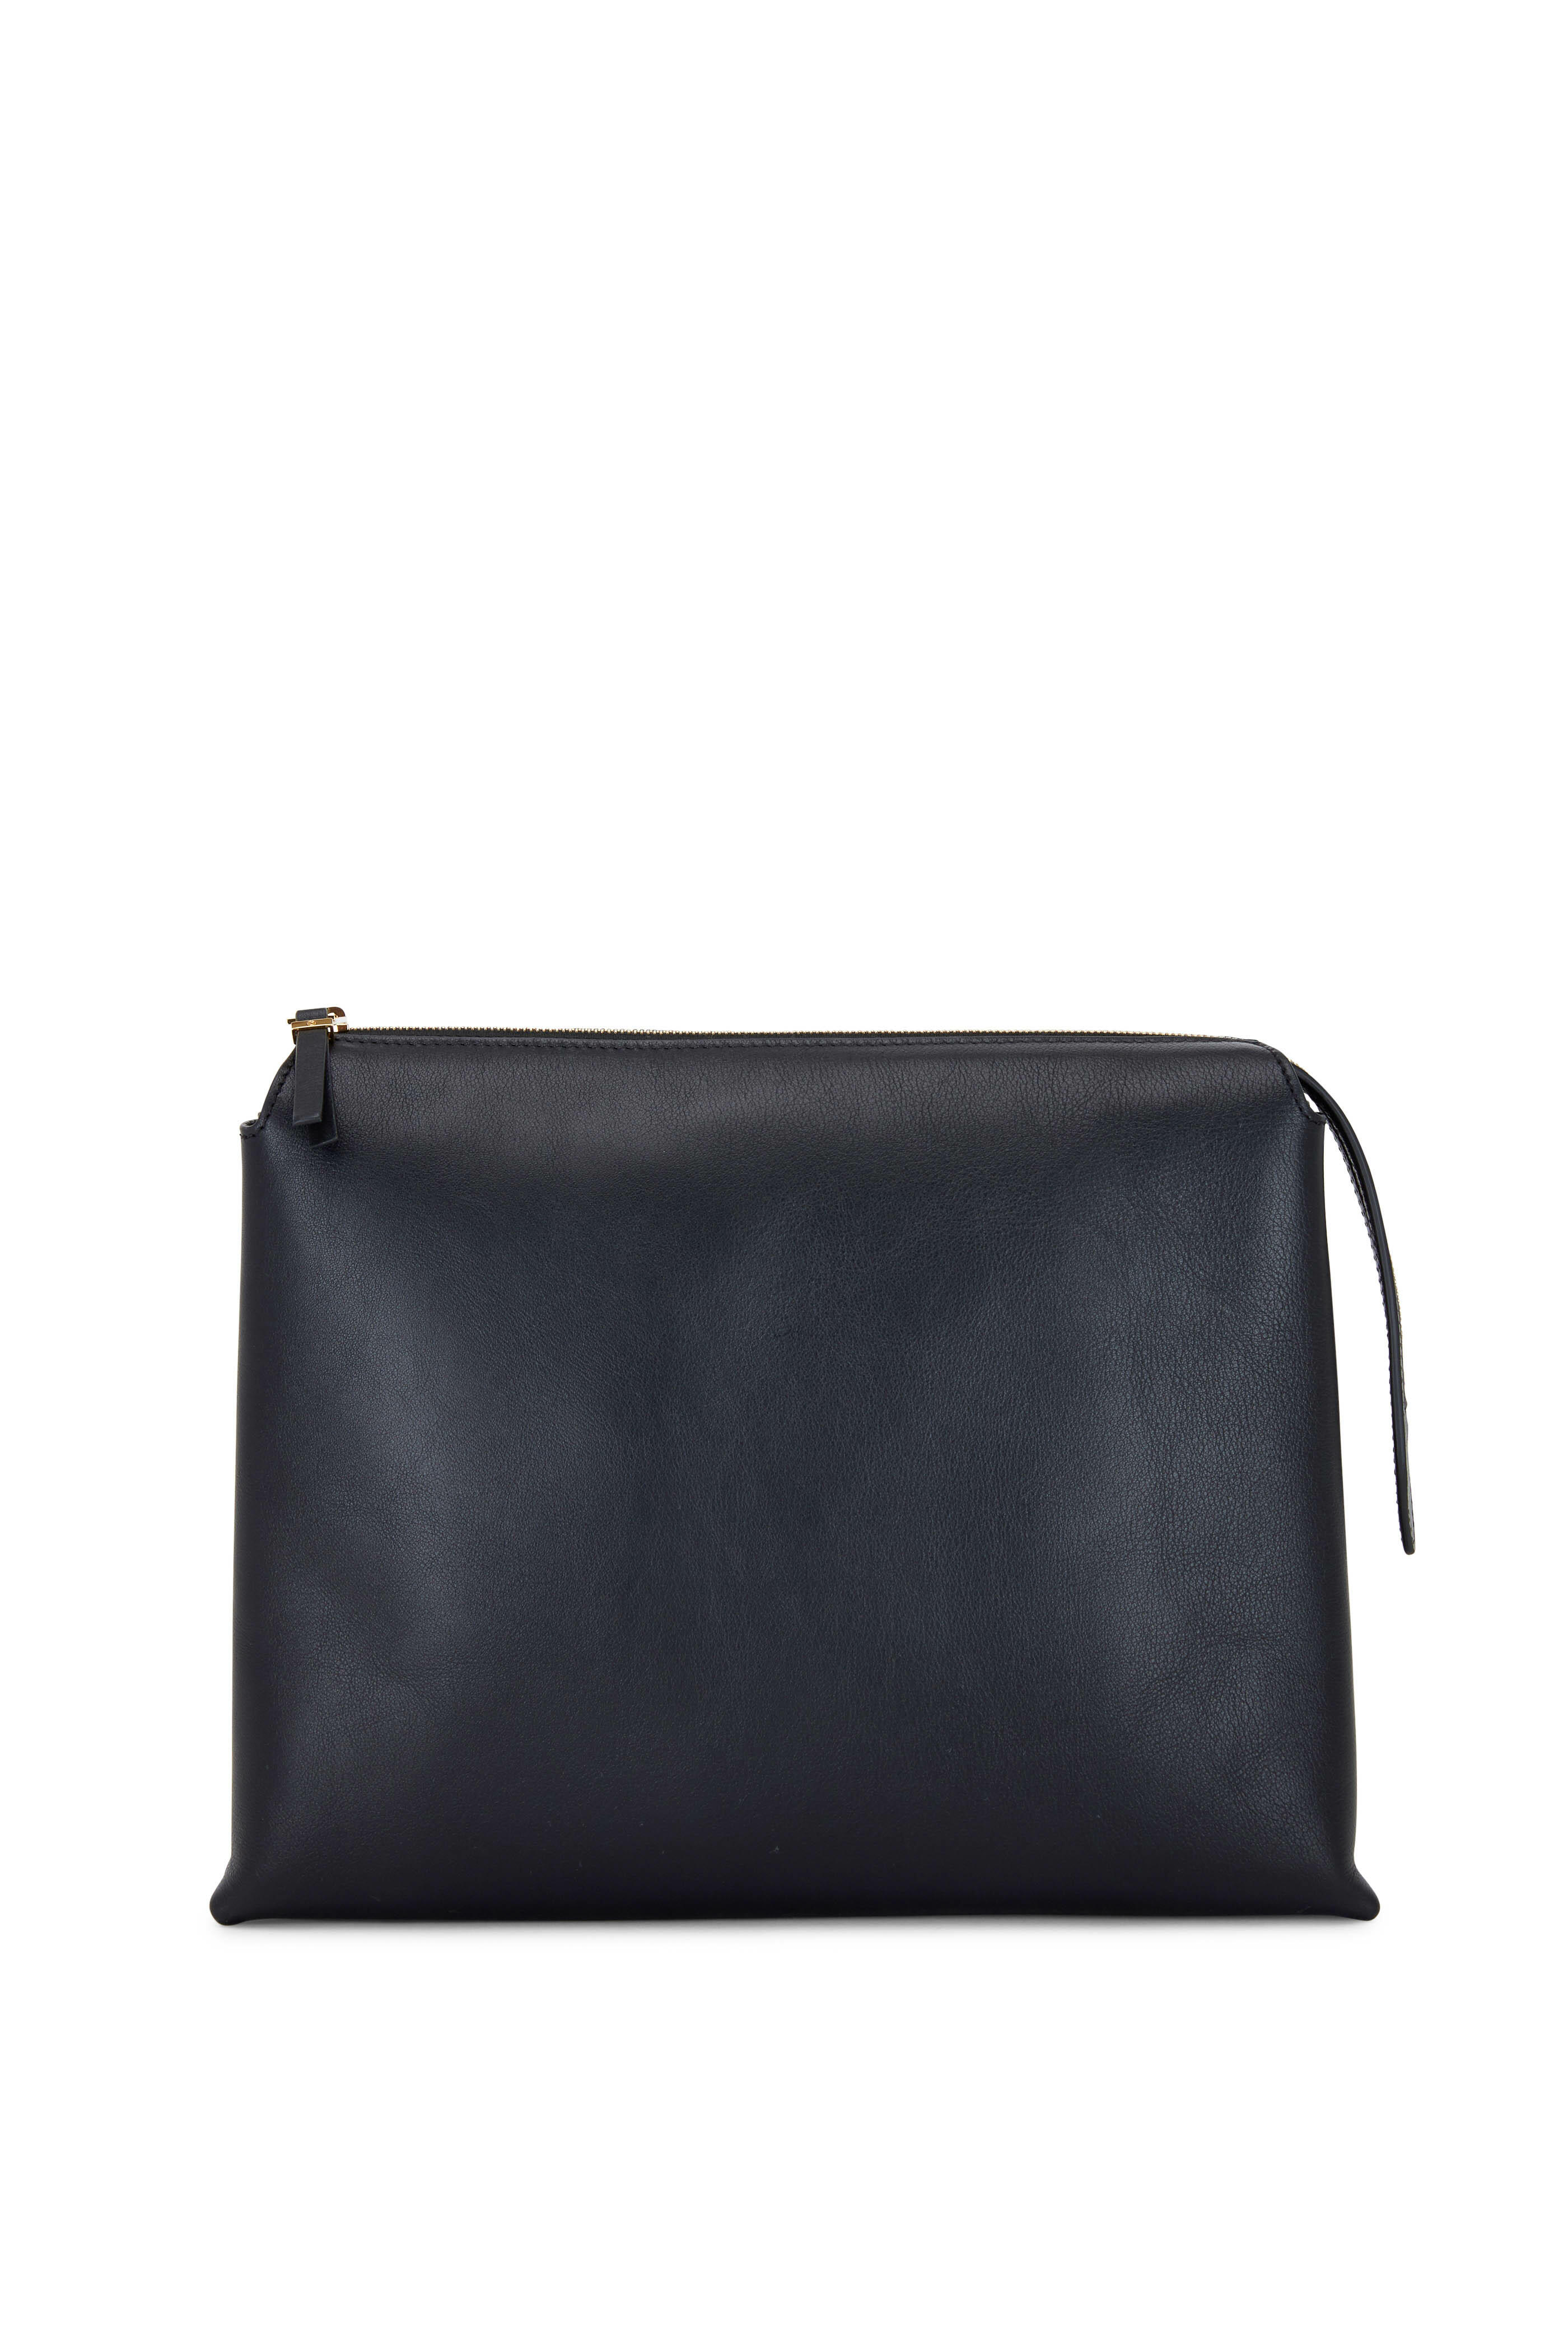 The Row Women's Large Banana Black Leather Crossbody Bag | by Mitchell Stores